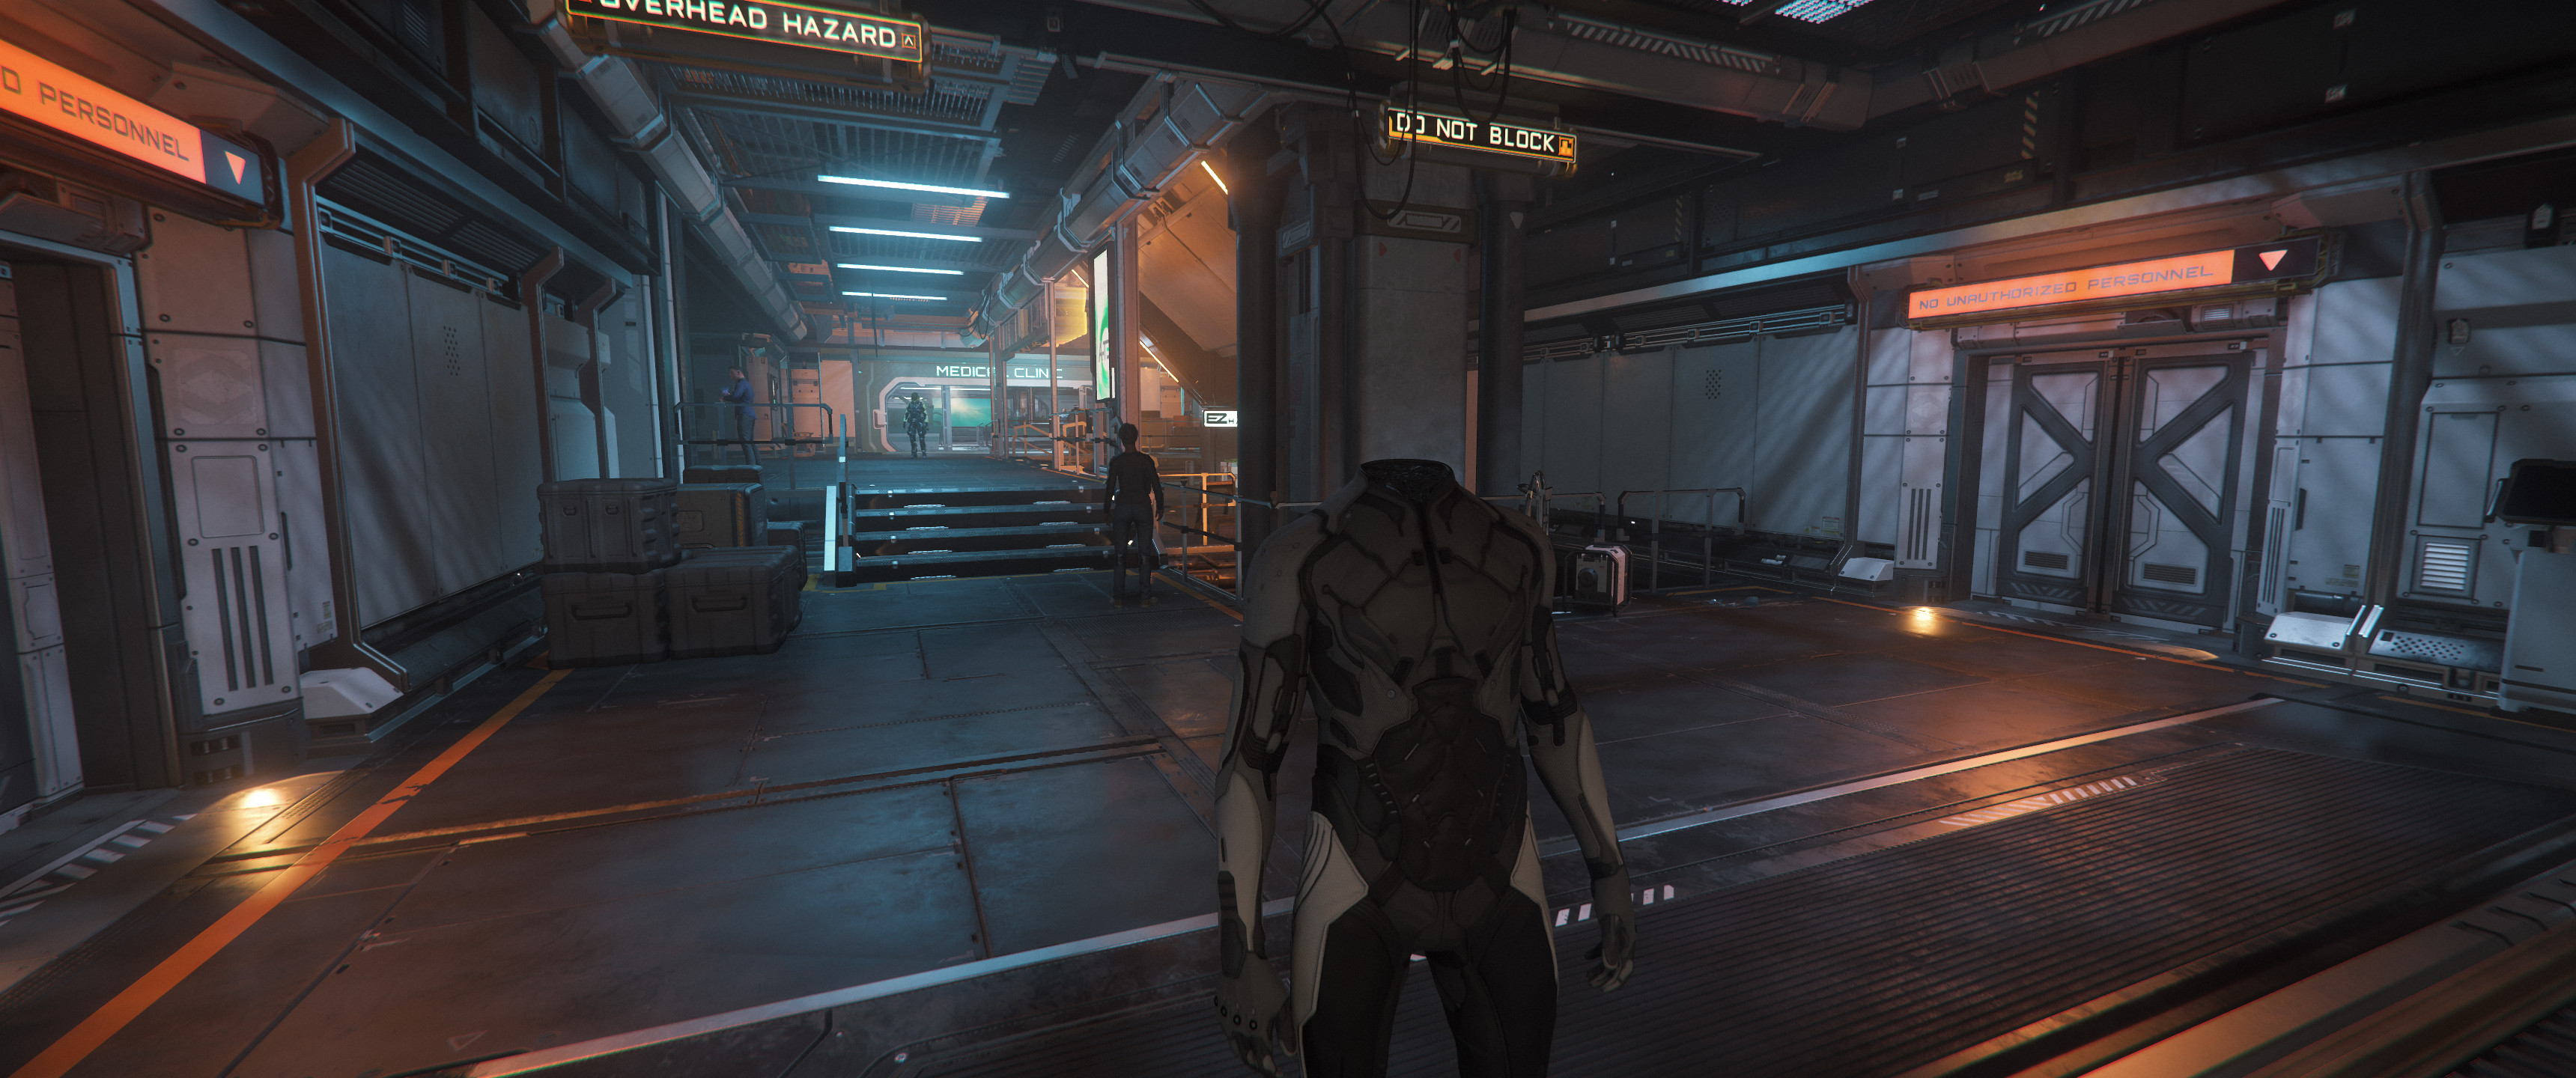 Third person view of a character in a flight suit, standing in a station corridor without a head